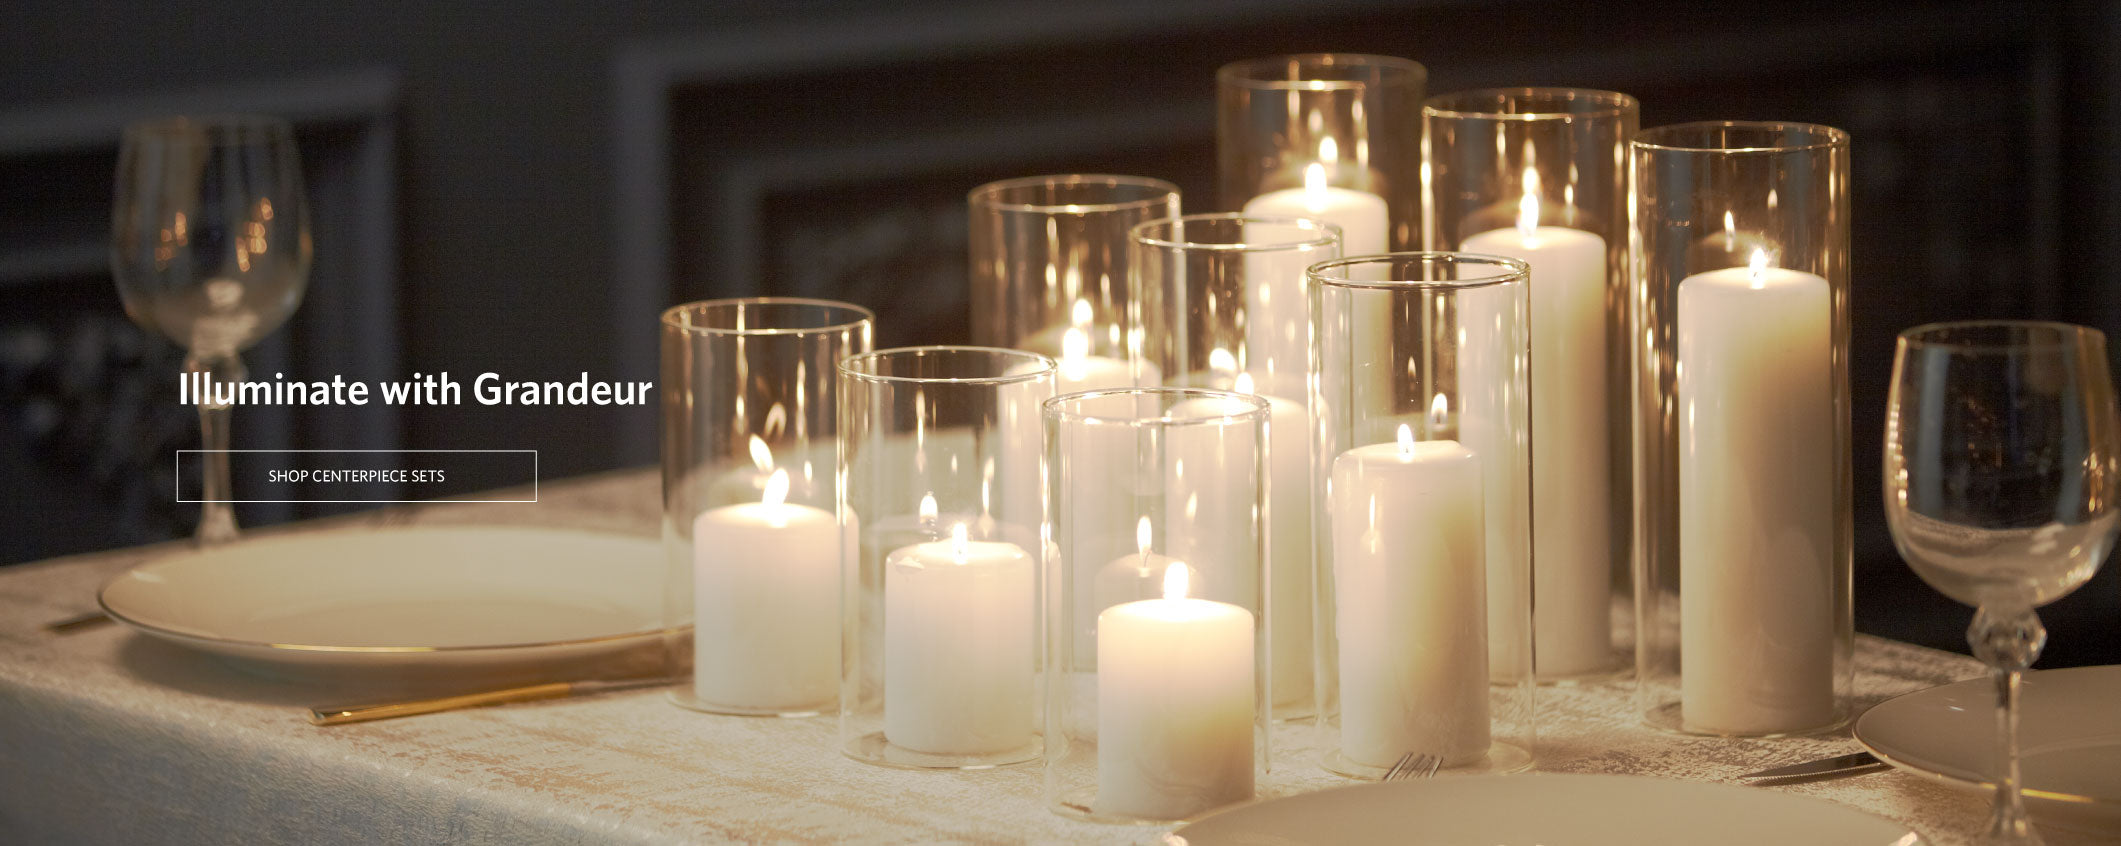 Classic White Candles in Glass, Set of 4, 8-inches Tall : : Home